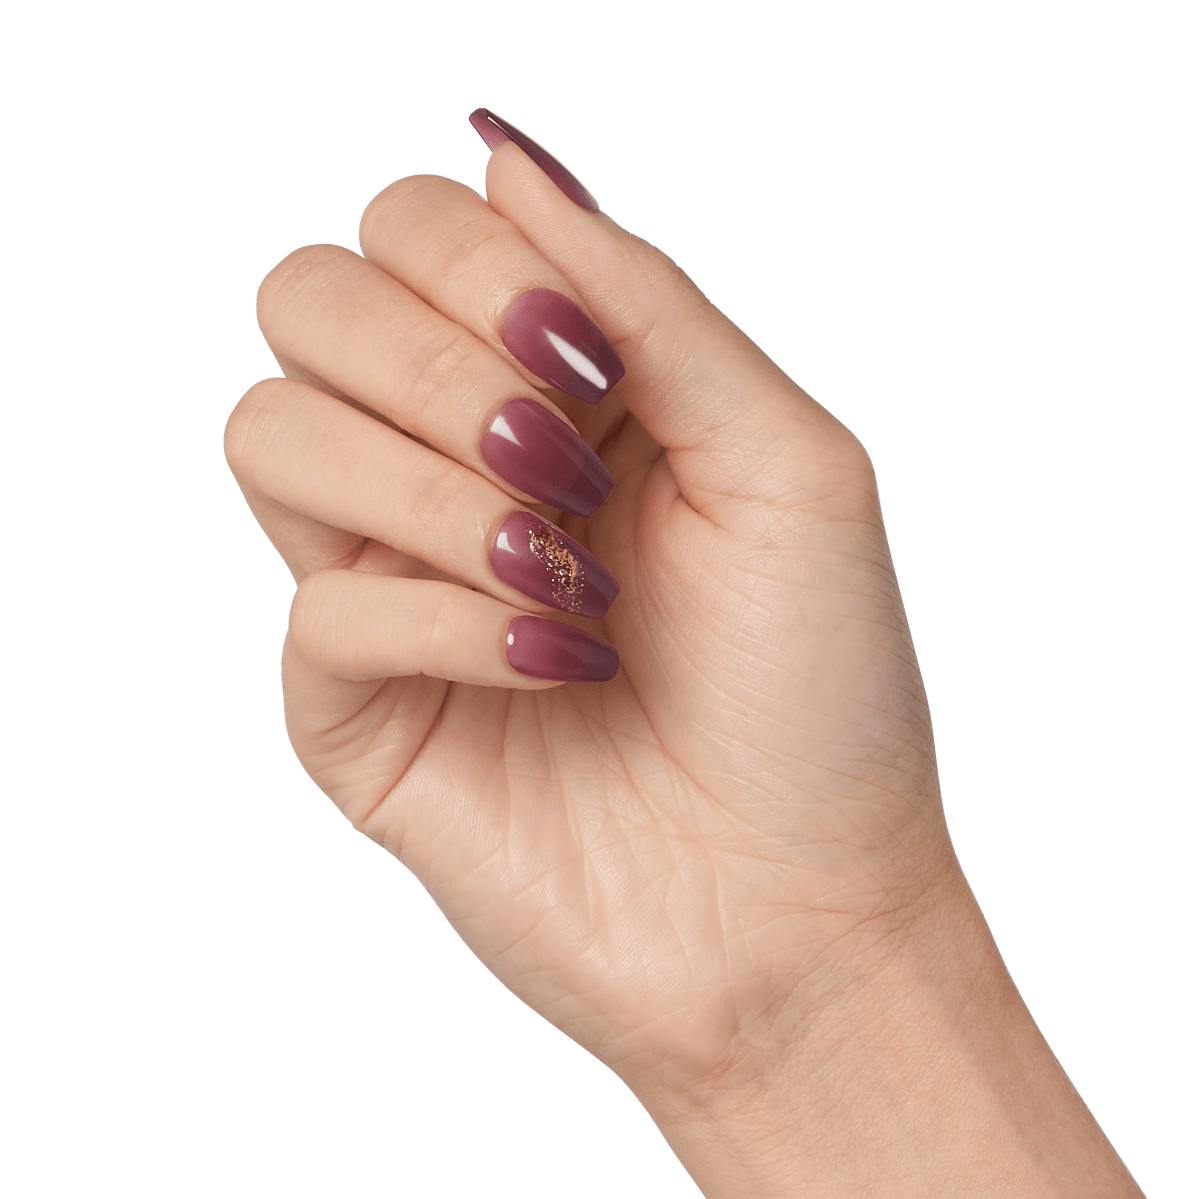 imPRESS Harvest Ombre Press-On Manicure - Ready for Fall